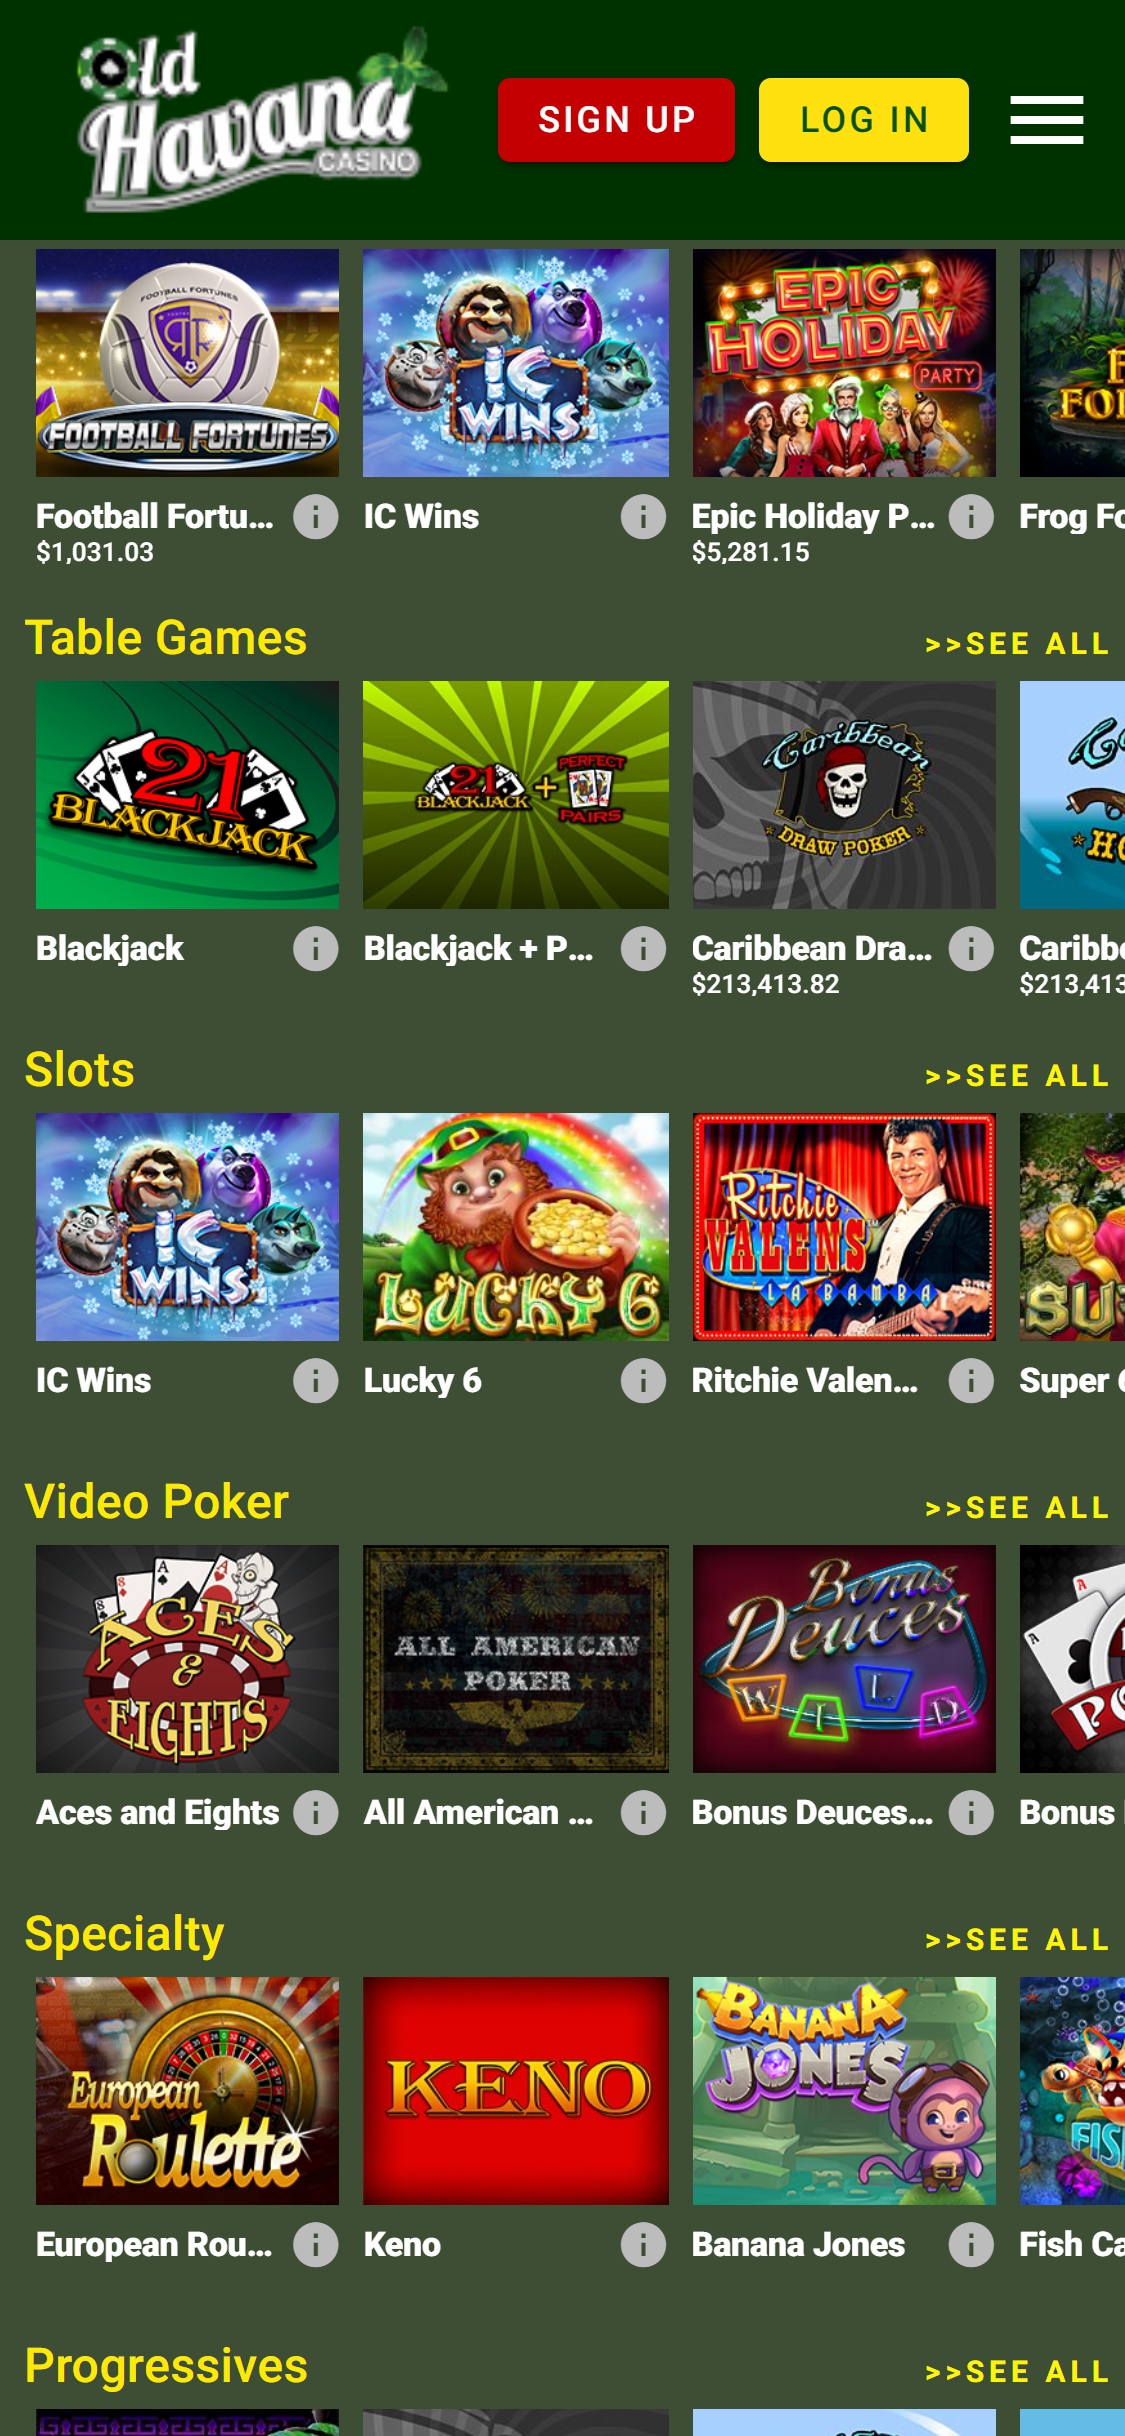 Old Havana Casino Mobile Games Review